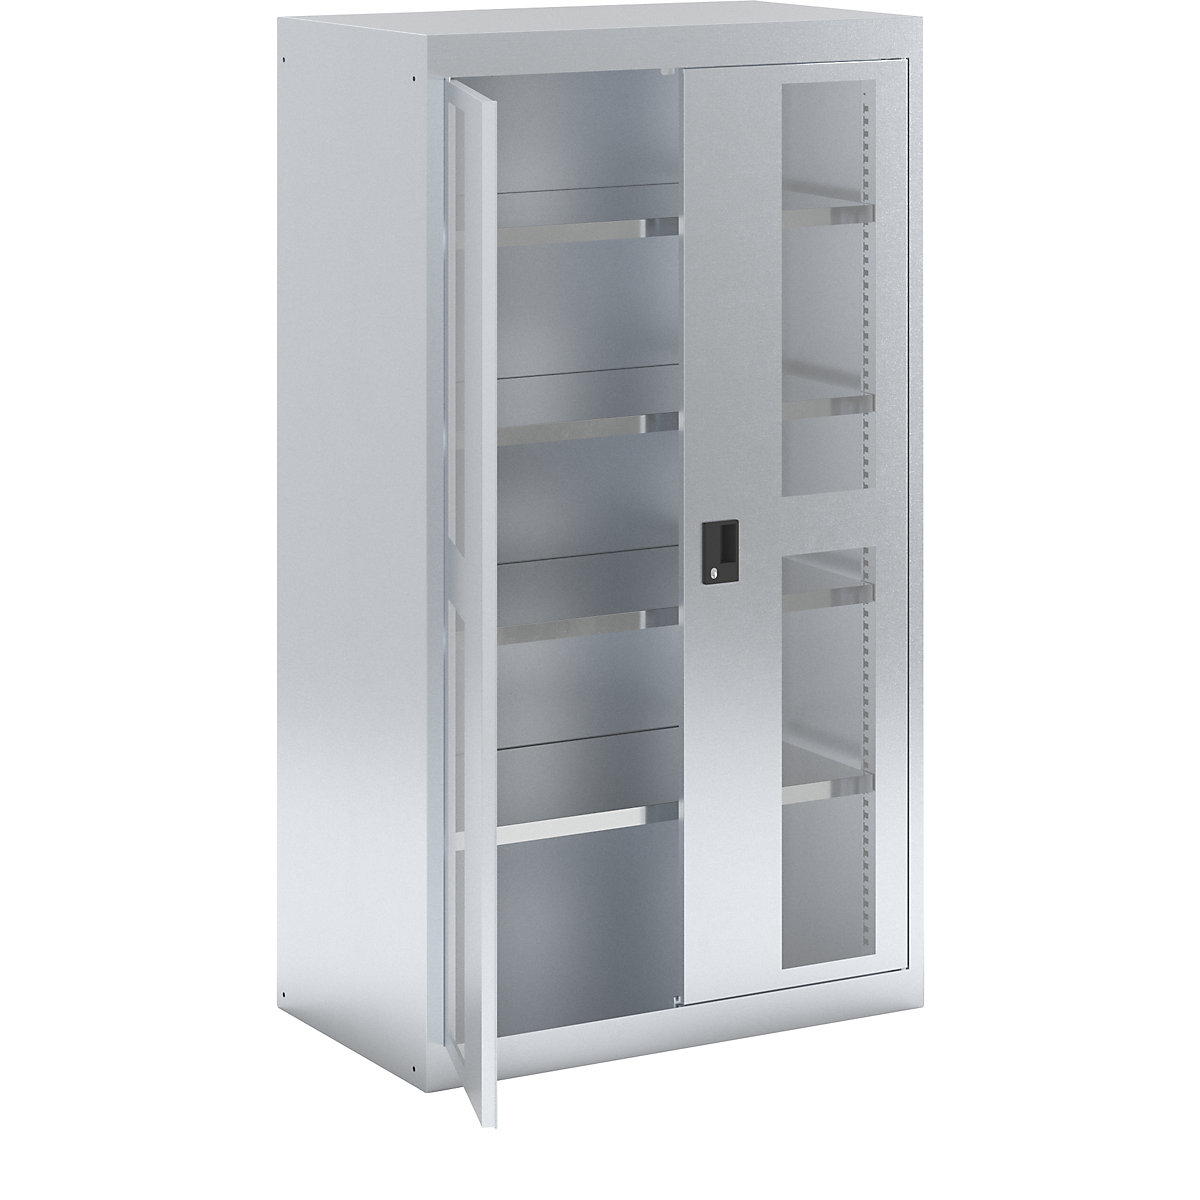 Heavy duty cupboard – LISTA, 4 shelves, fitted with vision panel doors, light grey-4